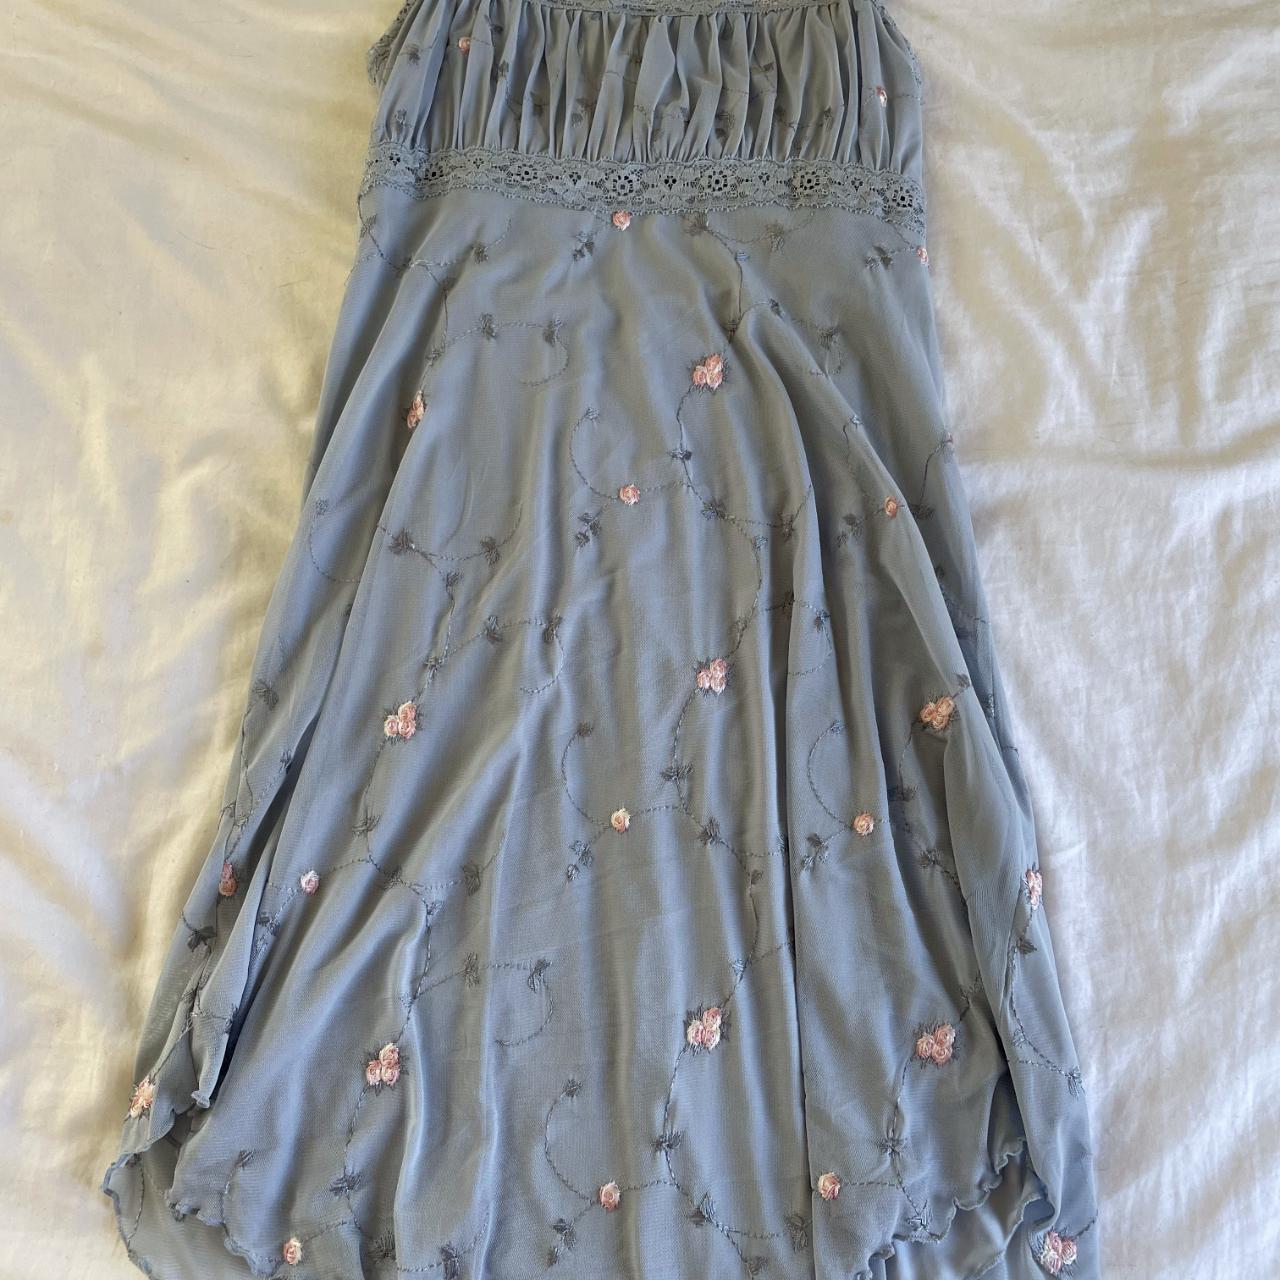 Urban Outfitters Women's Blue and Pink Dress